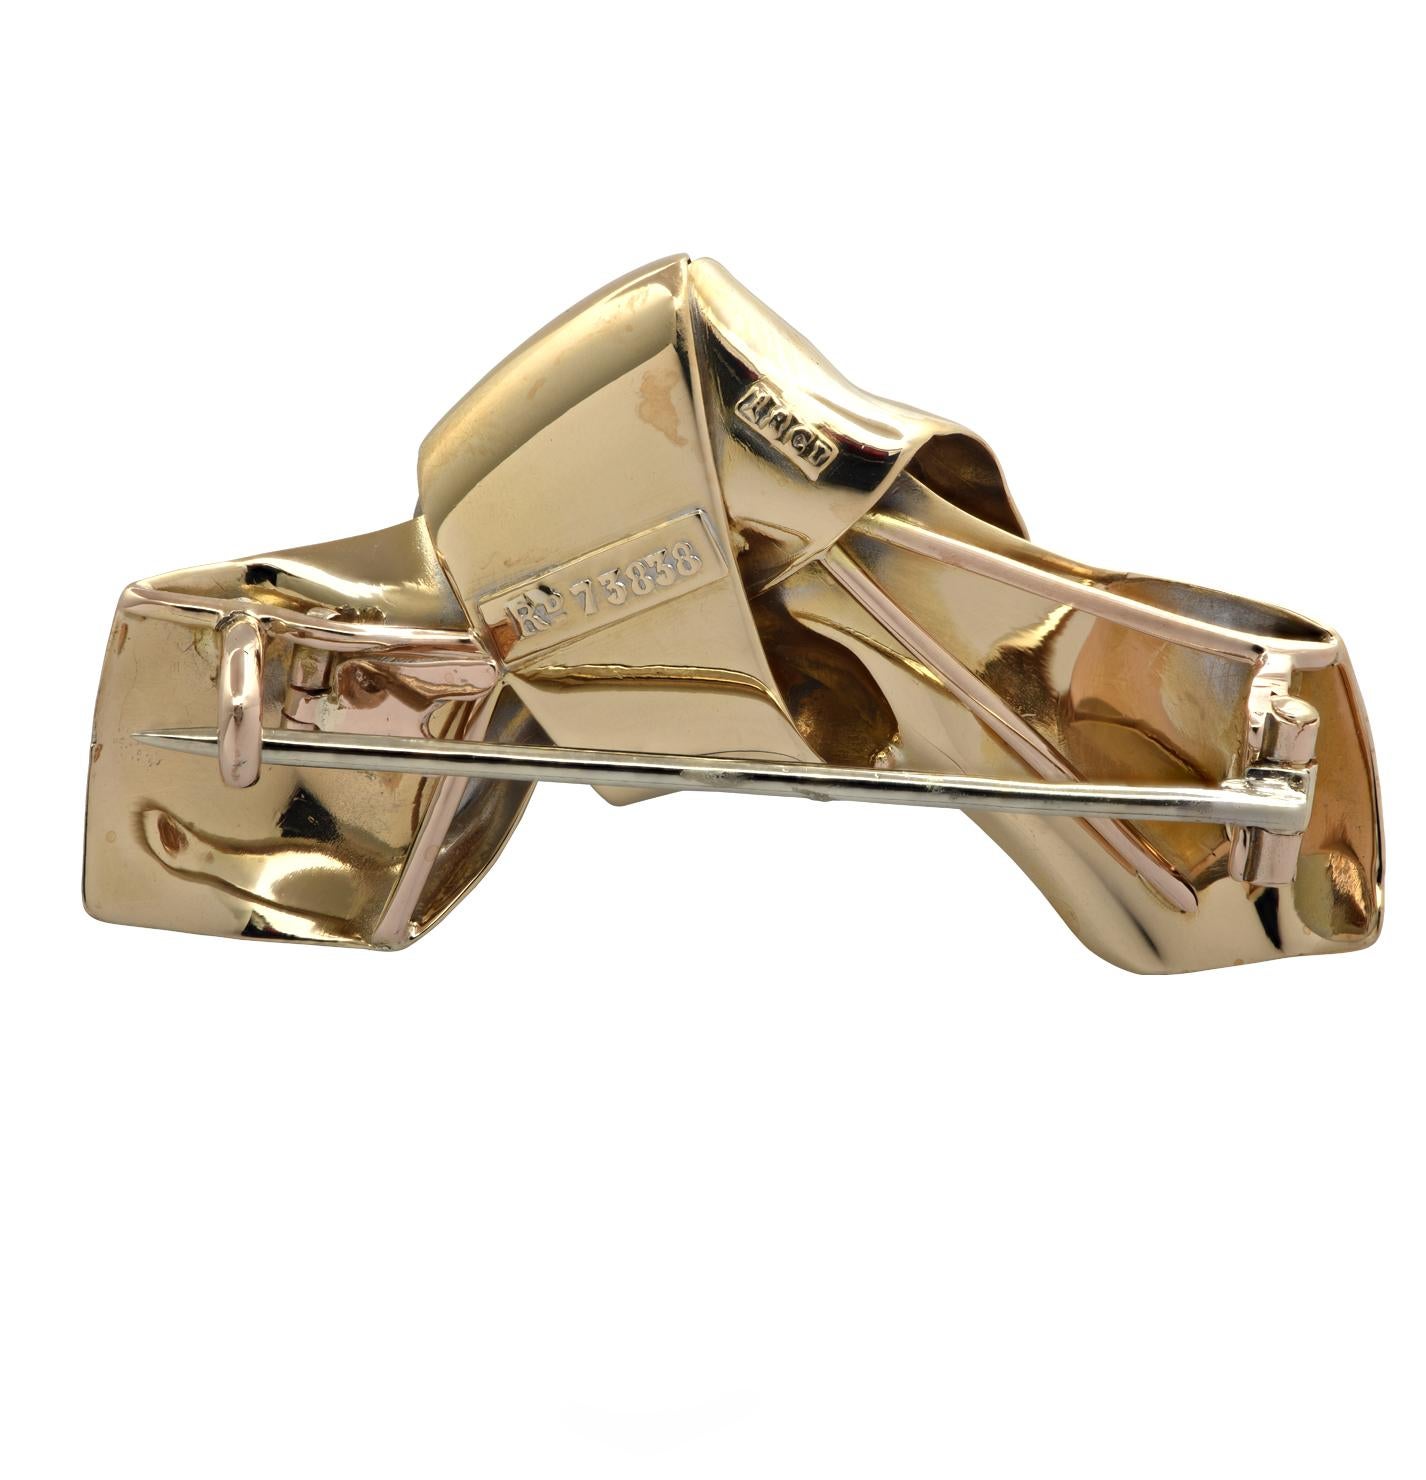 Beautiful Brooch Pin crafted in England in 18 karat yellow gold, showcasing an Old Mine Cut Diamond weighing approximately .35 carats, G-H color, VS clarity. The brooch pin is fashioned into a highly polished ribbon measuring 1.6 inches in length